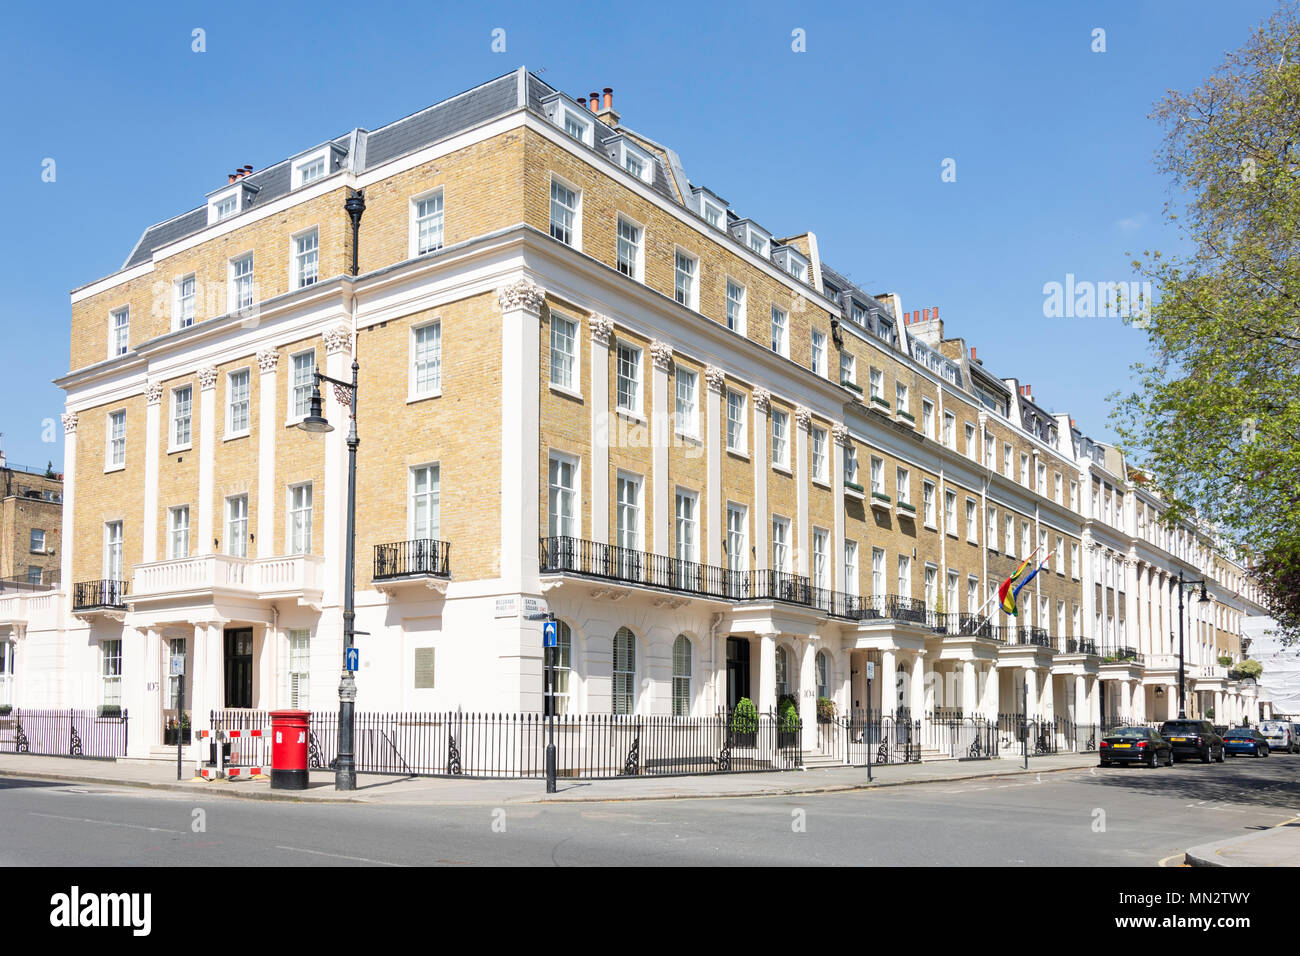 Maisons mitoyennes de style classique, Eaton Square, Belgravia, City of westminster, Greater London, Angleterre, Royaume-Uni Banque D'Images